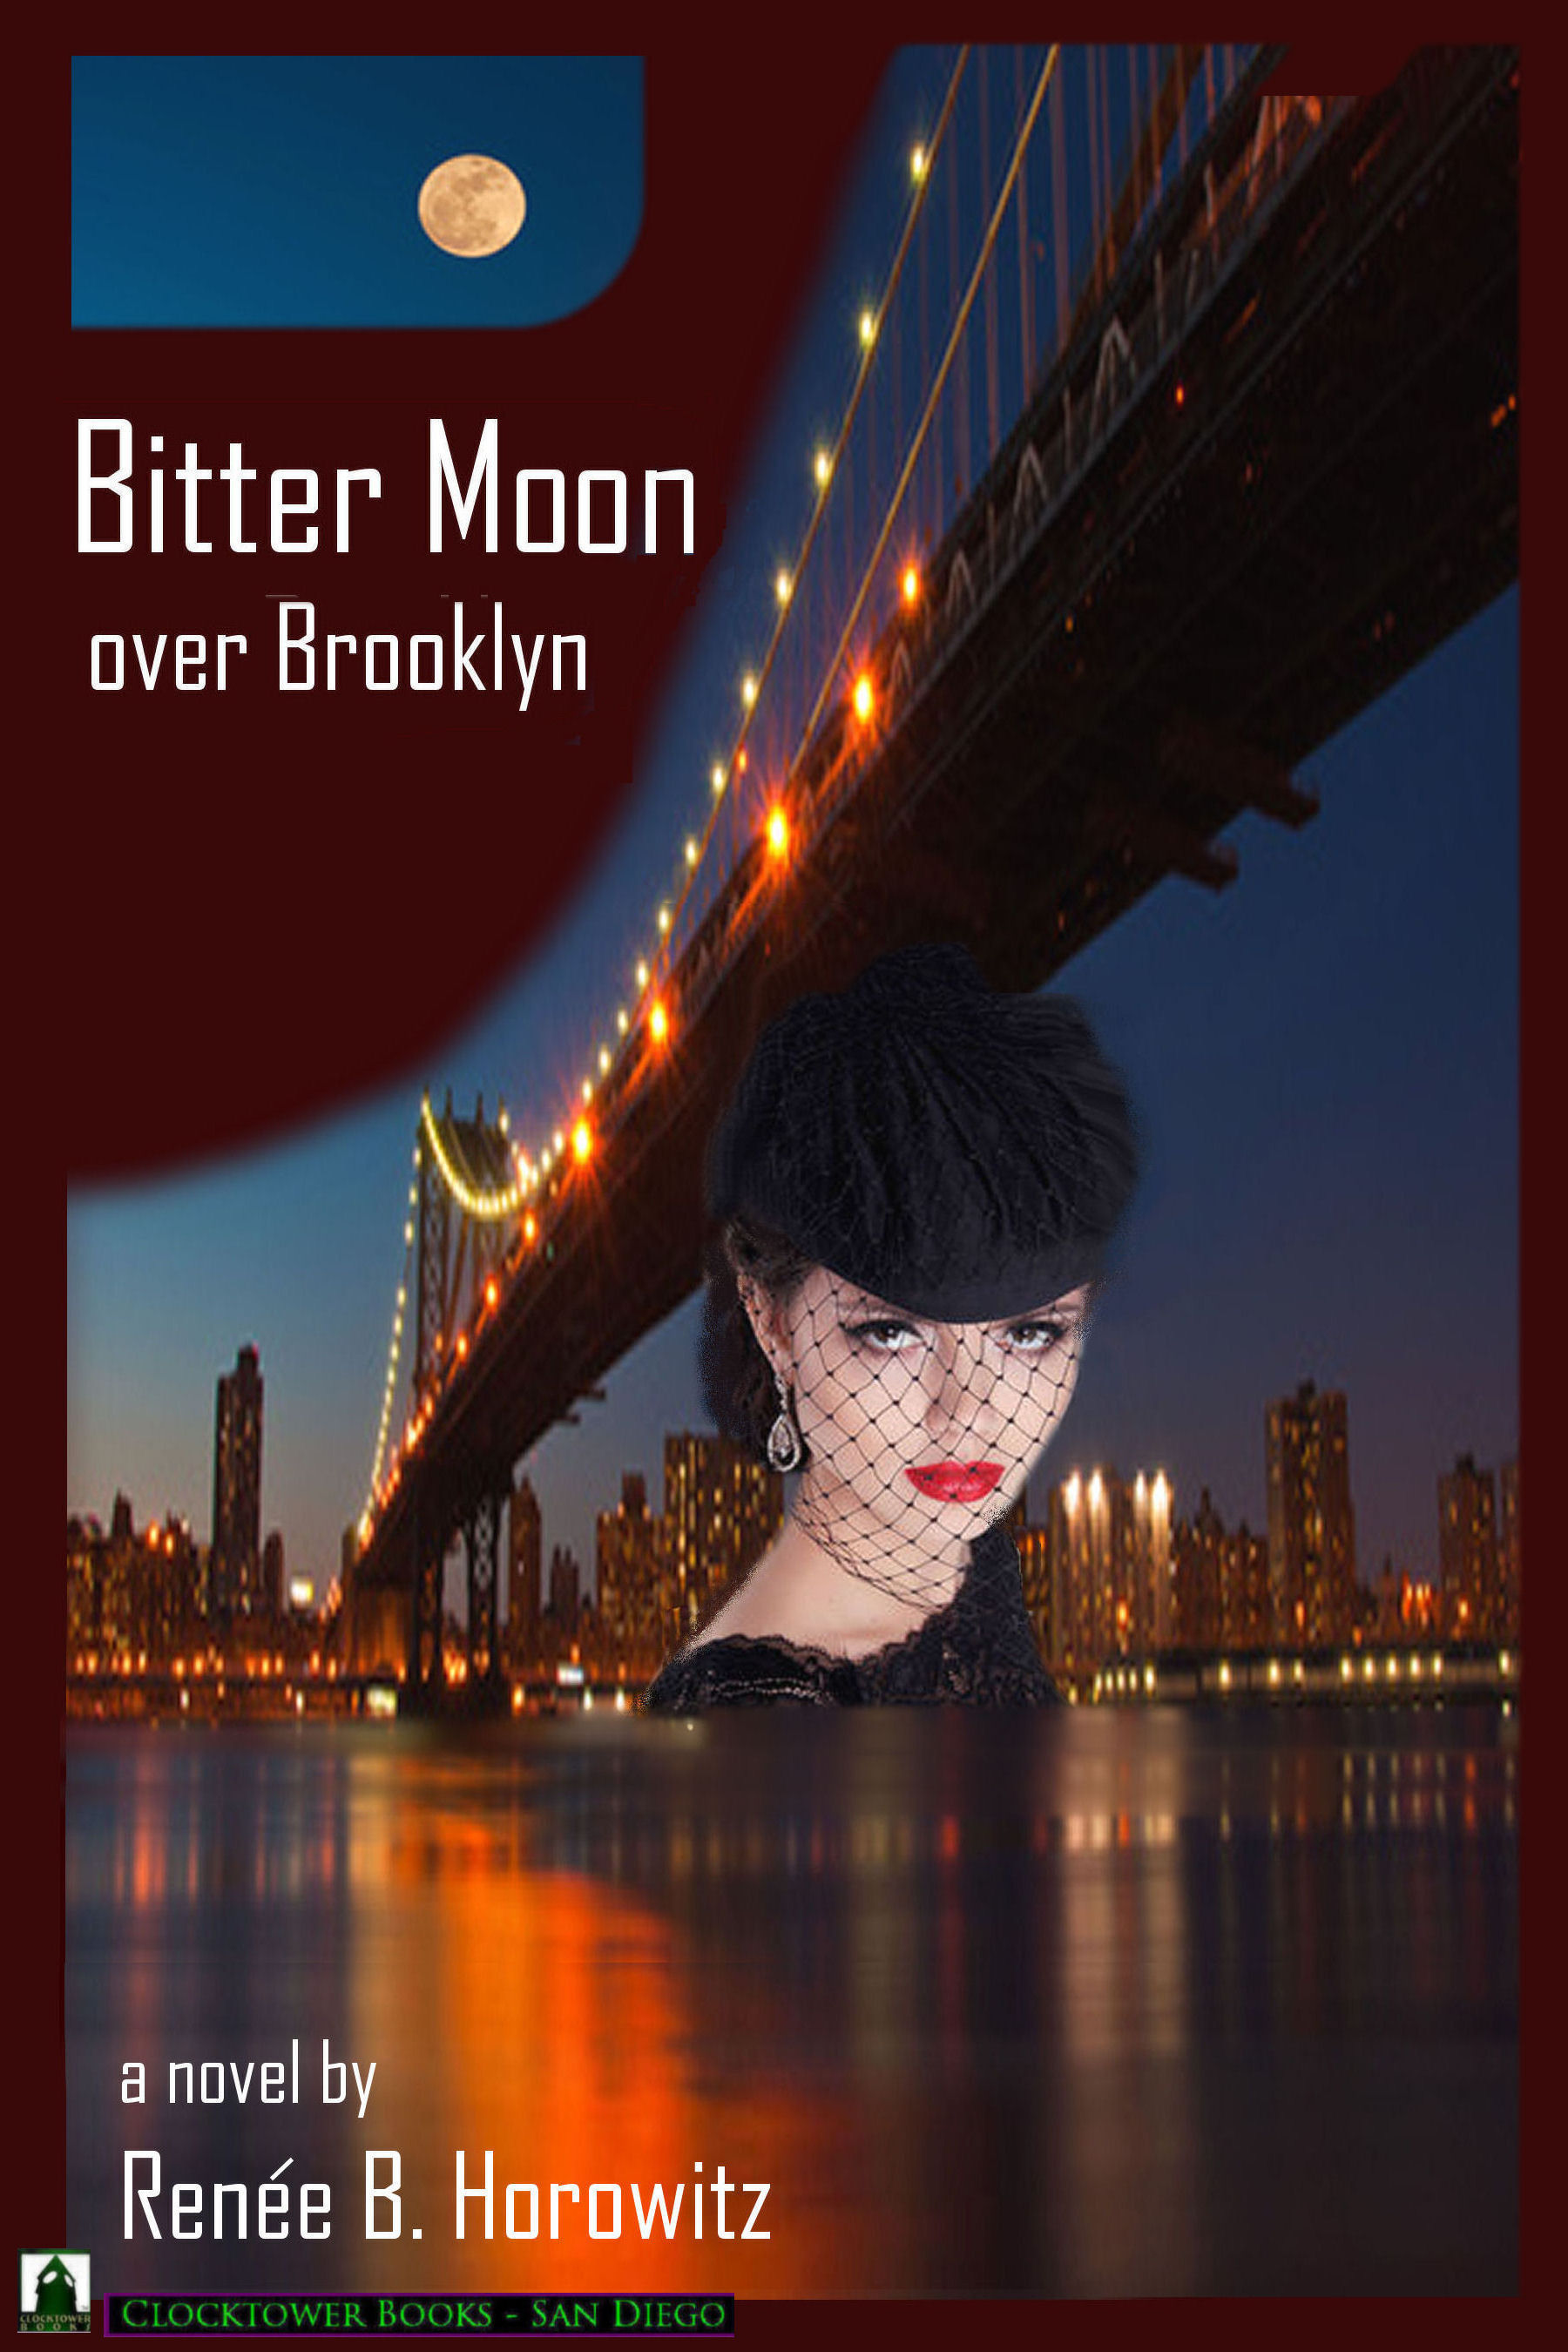 Bitter Moon over Brooklyn by Renee Horowitz soap at its best and most literary